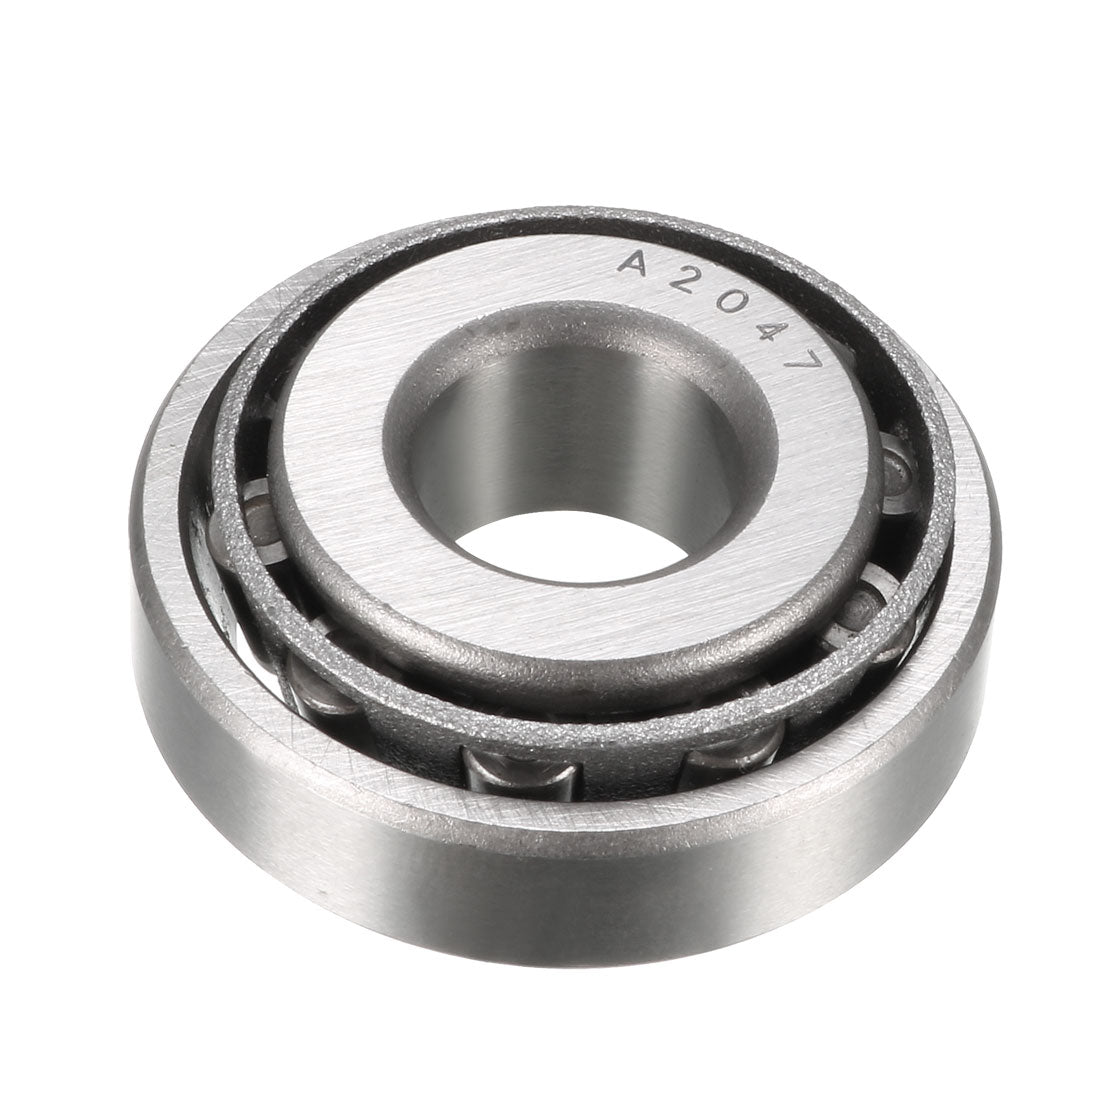 Uxcell Uxcell A2047/A2126 Tapered Roller Bearing Cone and Cup Set 0.4719" Bore 1.2595" O.D.